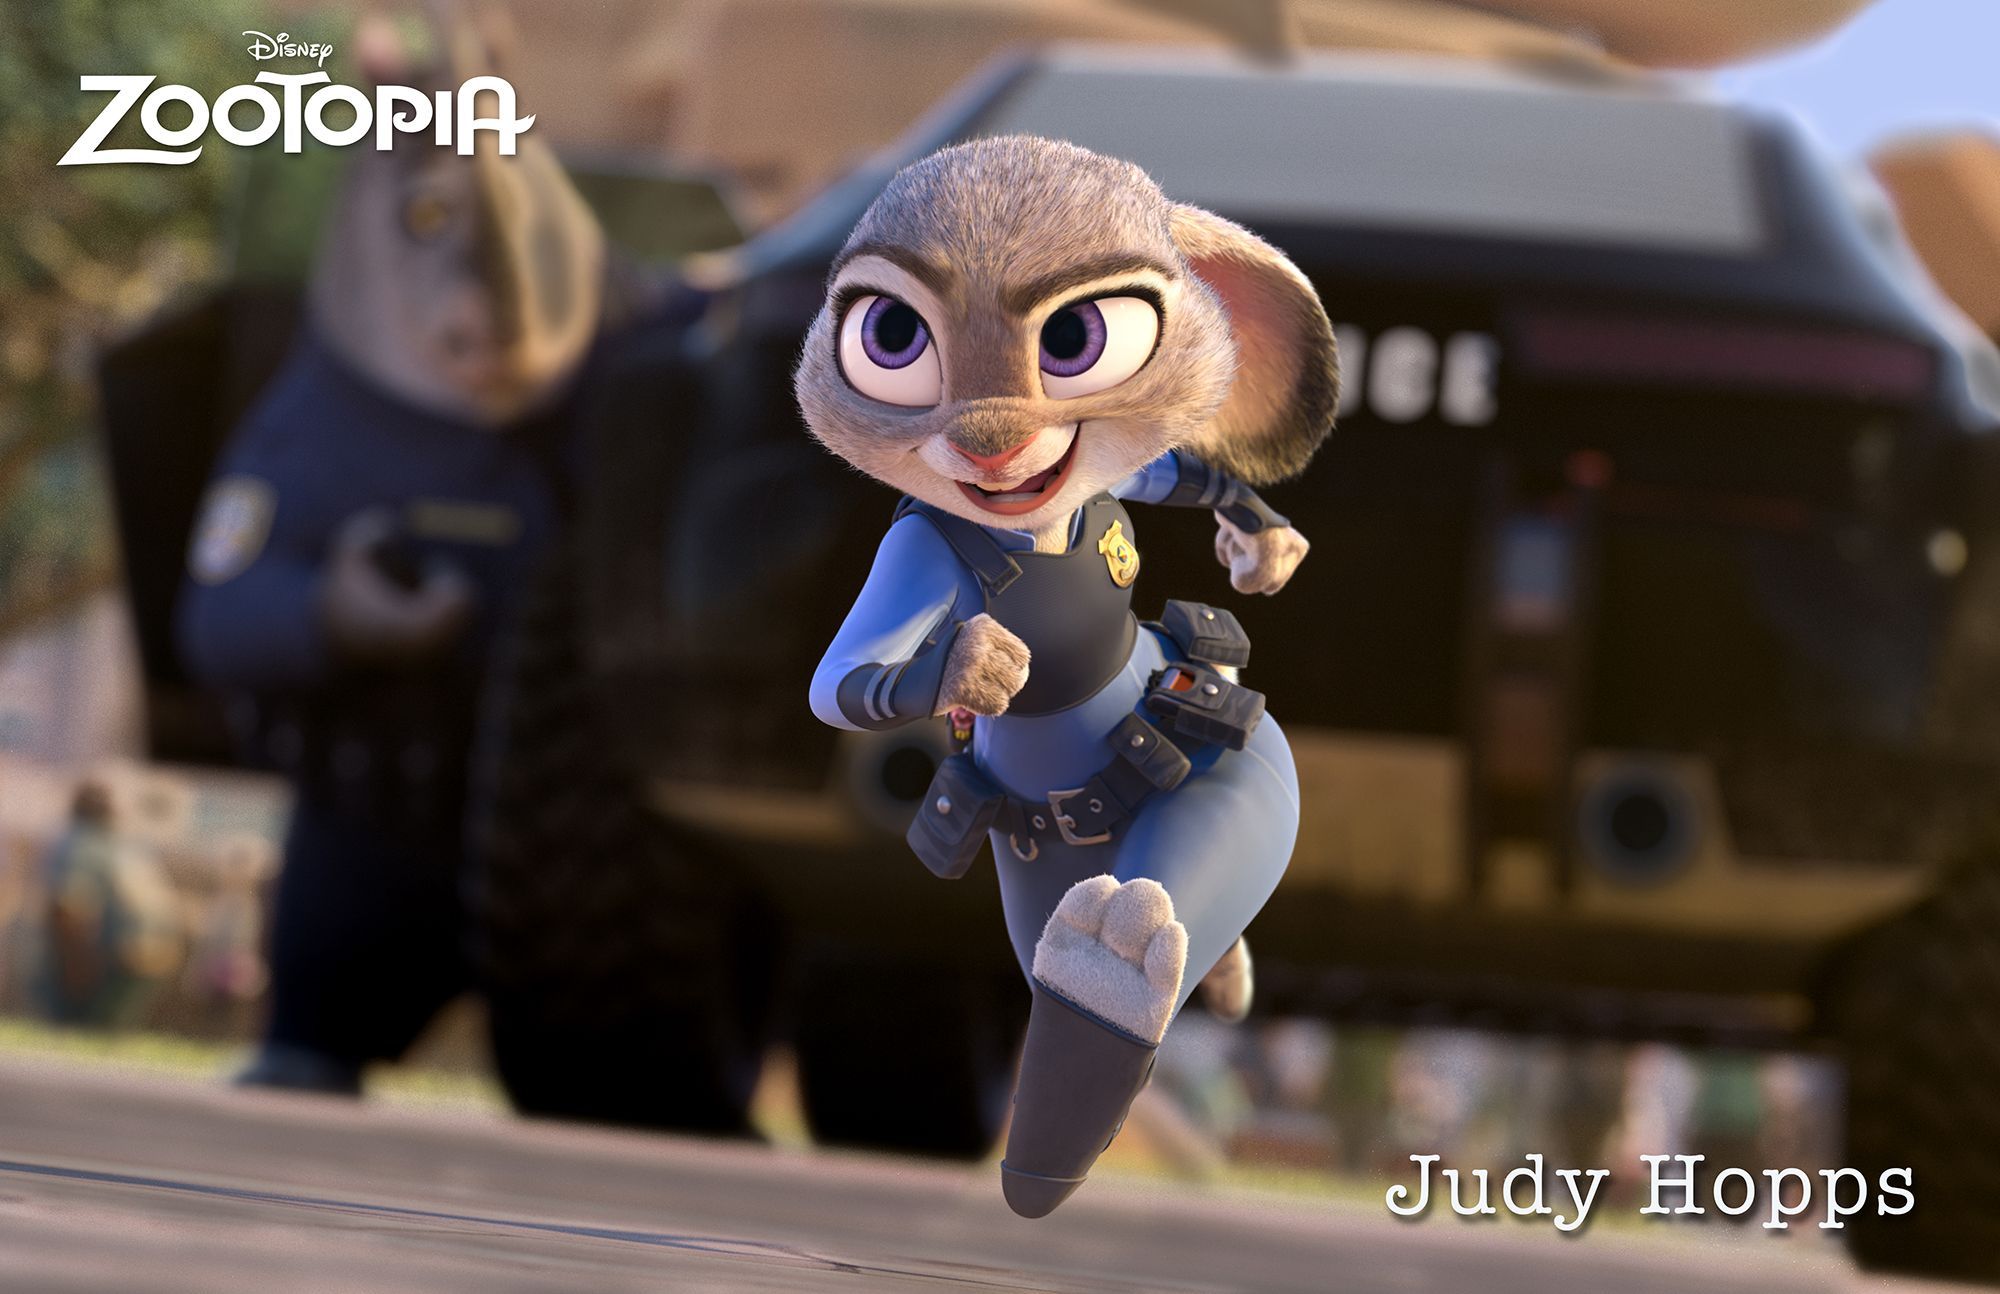 Zootopia 340823 Gallery, Images, Posters, Wallpapers and Stills